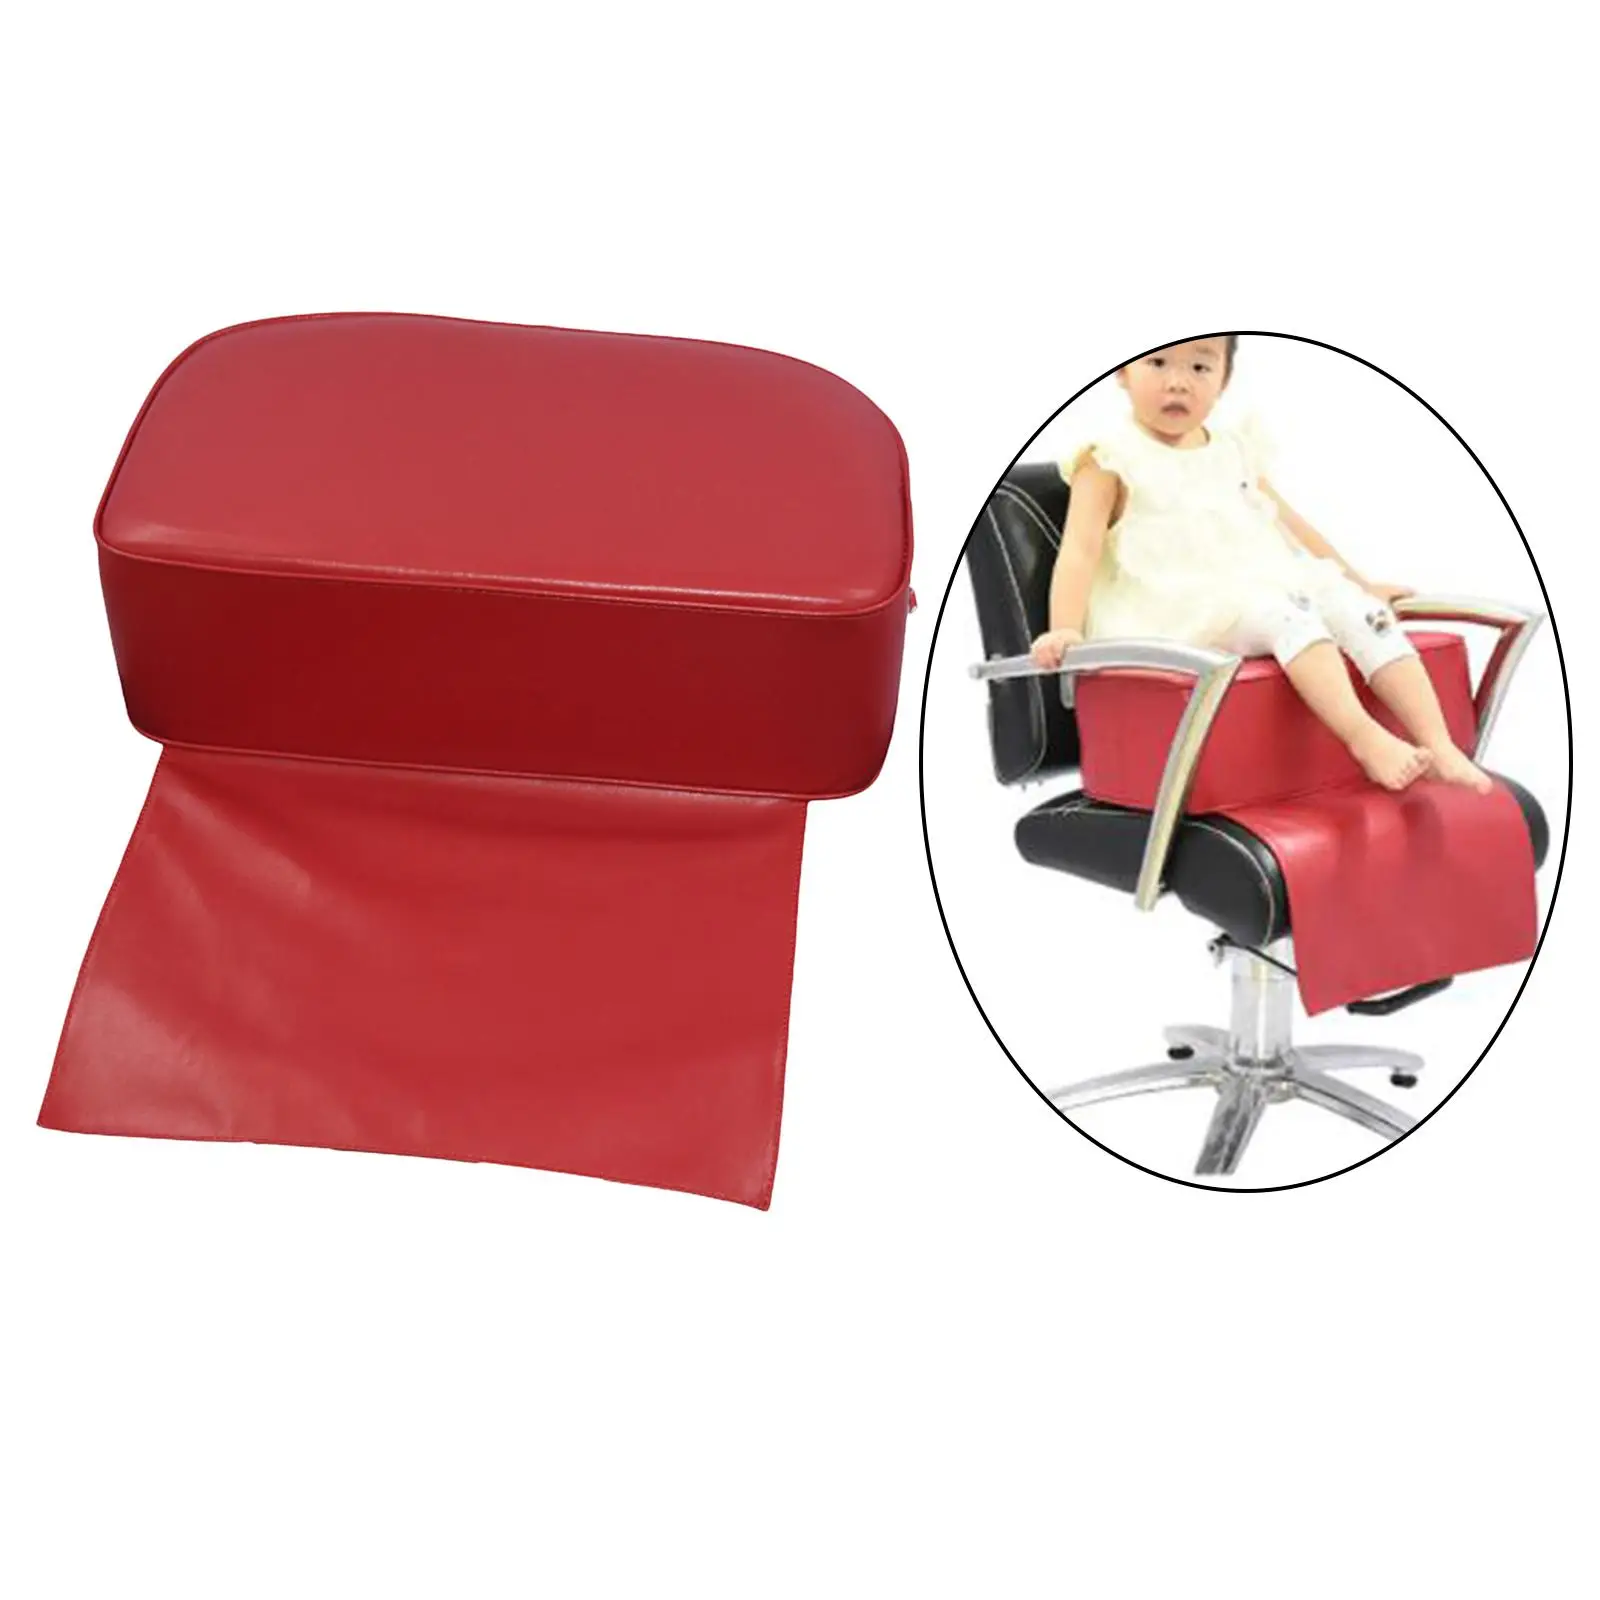 Child Barber Chair Seat Booster Beauty Salon Spa Equipment Cushion, Protecting Your Styling Chair, Comfortable and Durable